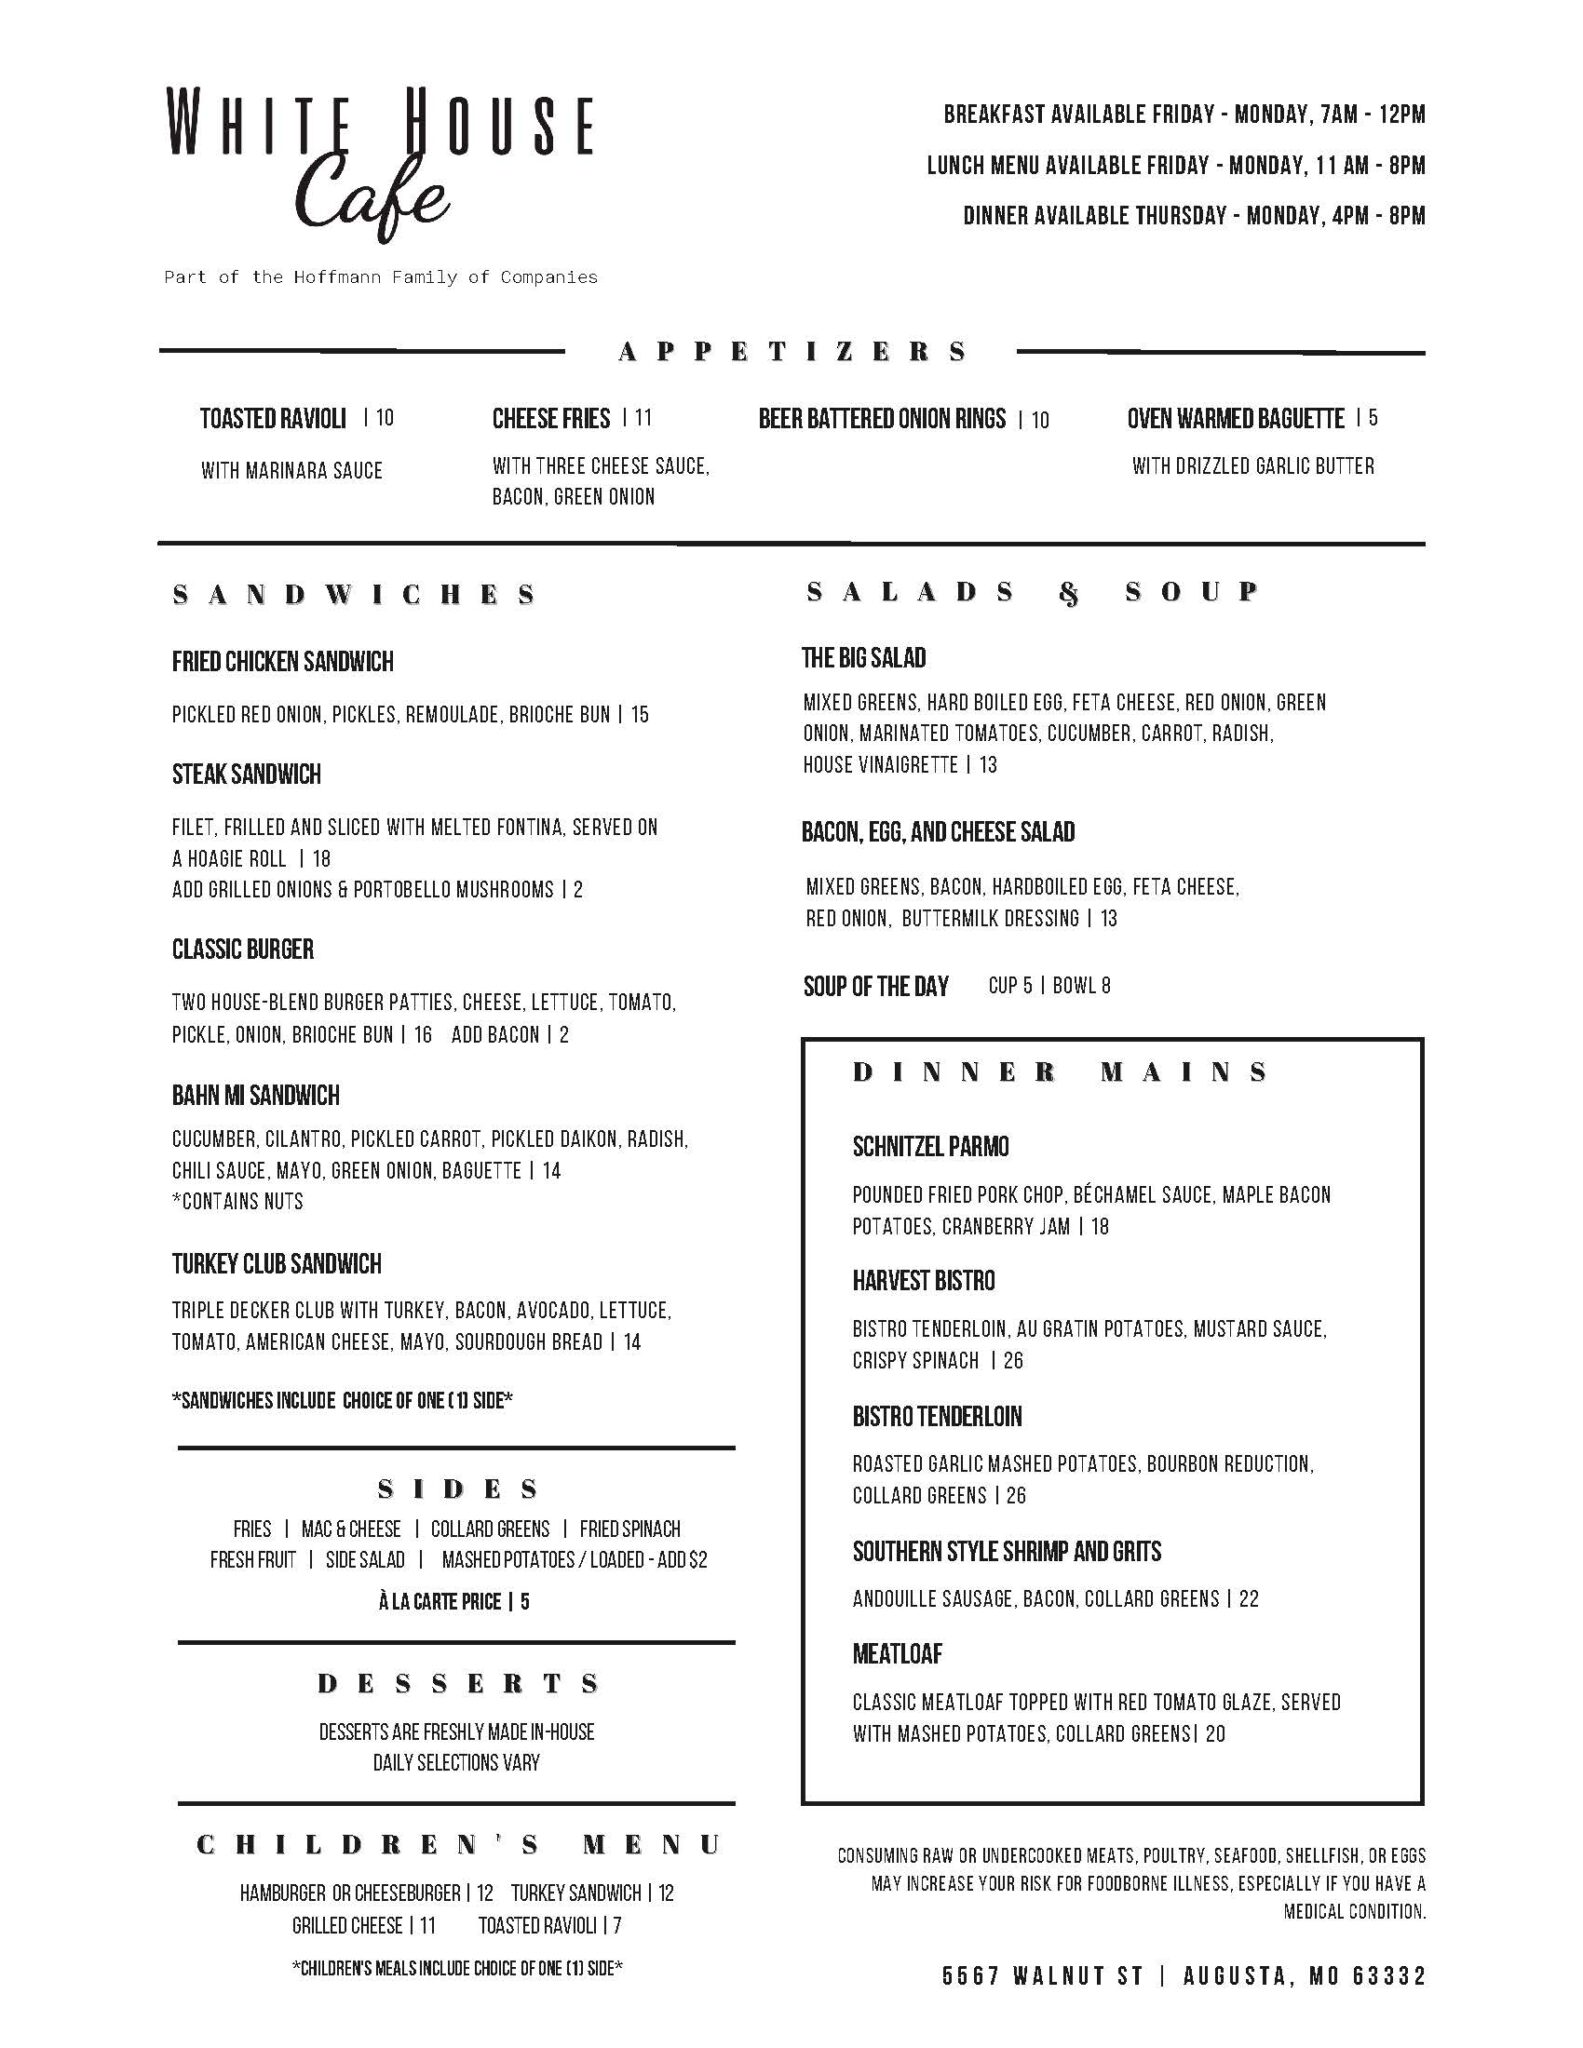 WH Cafe Menus - REVISED 6.1.23_Page_1